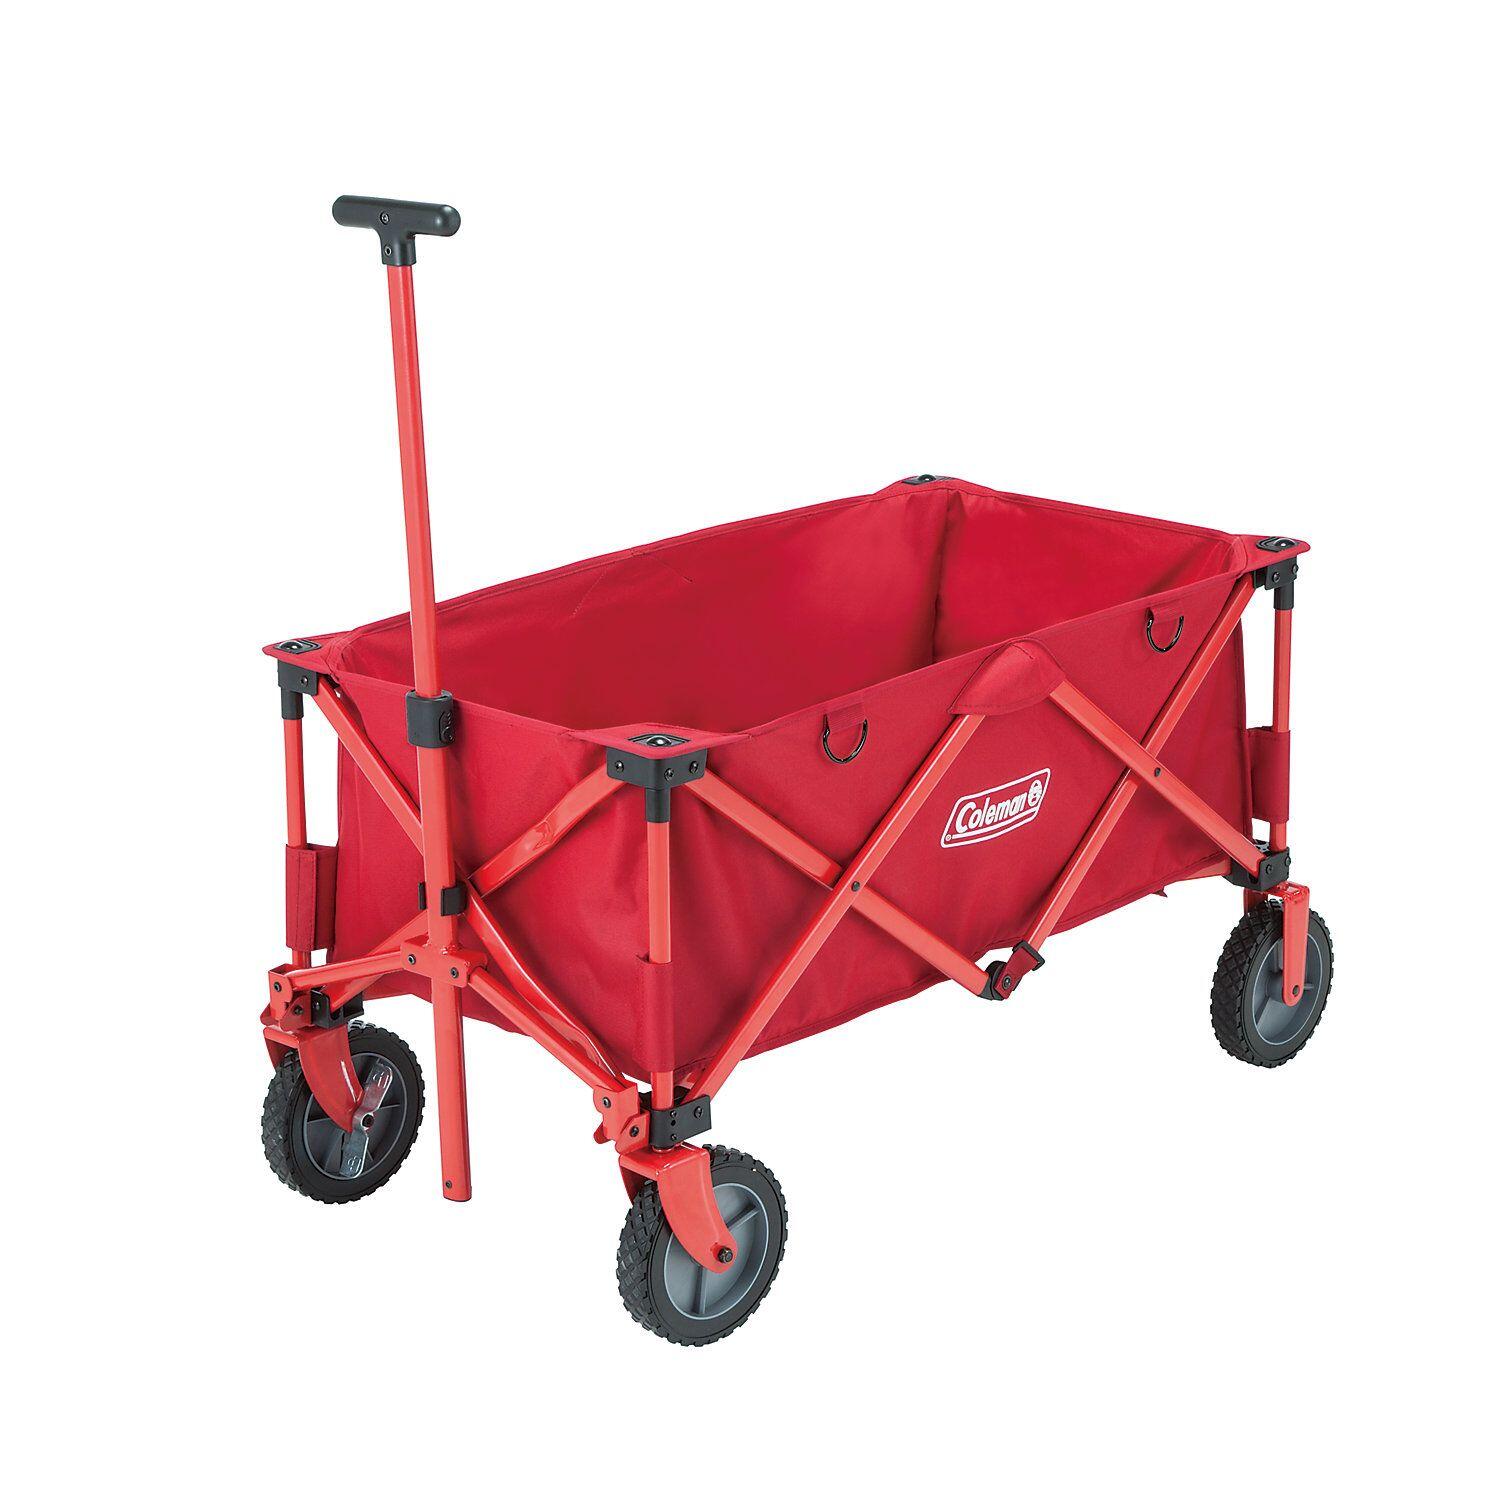 COLEMAN Coleman Outdoor Camping Wagon